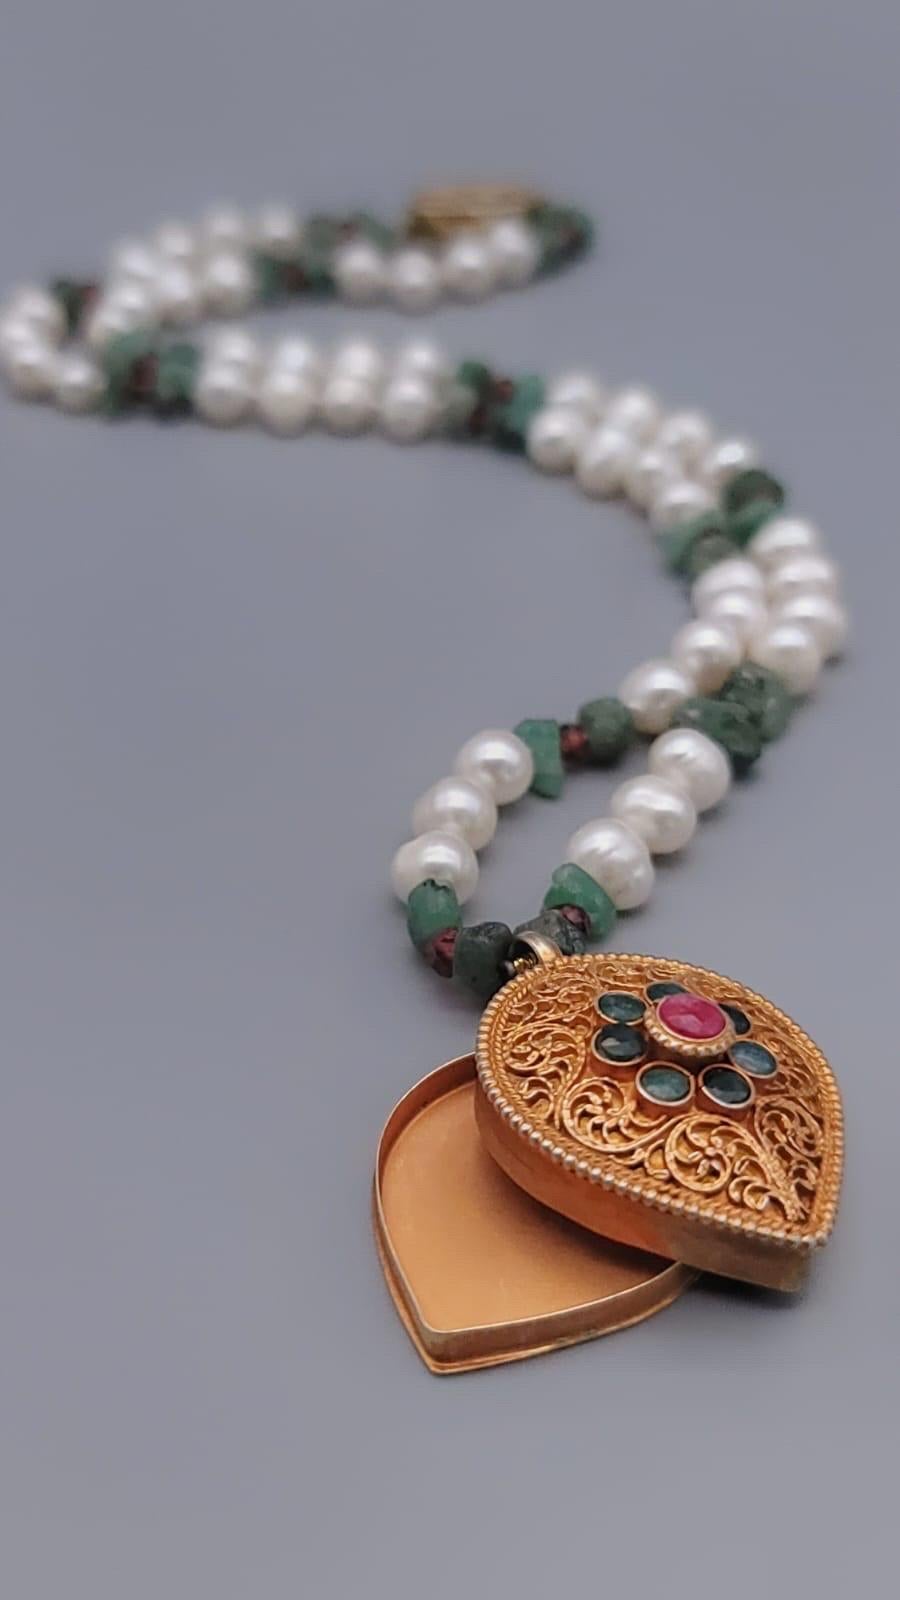 One-of-a-Kind

Emerald and Ruby encrusted hand-crafted heart-shaped Ghau box hang from a pearl, ruby, emerald necklace. 
Ghau boxes of gilt with the traditional filigree design painstakingly hand-tooled within the monastery walls by Tibetan monks